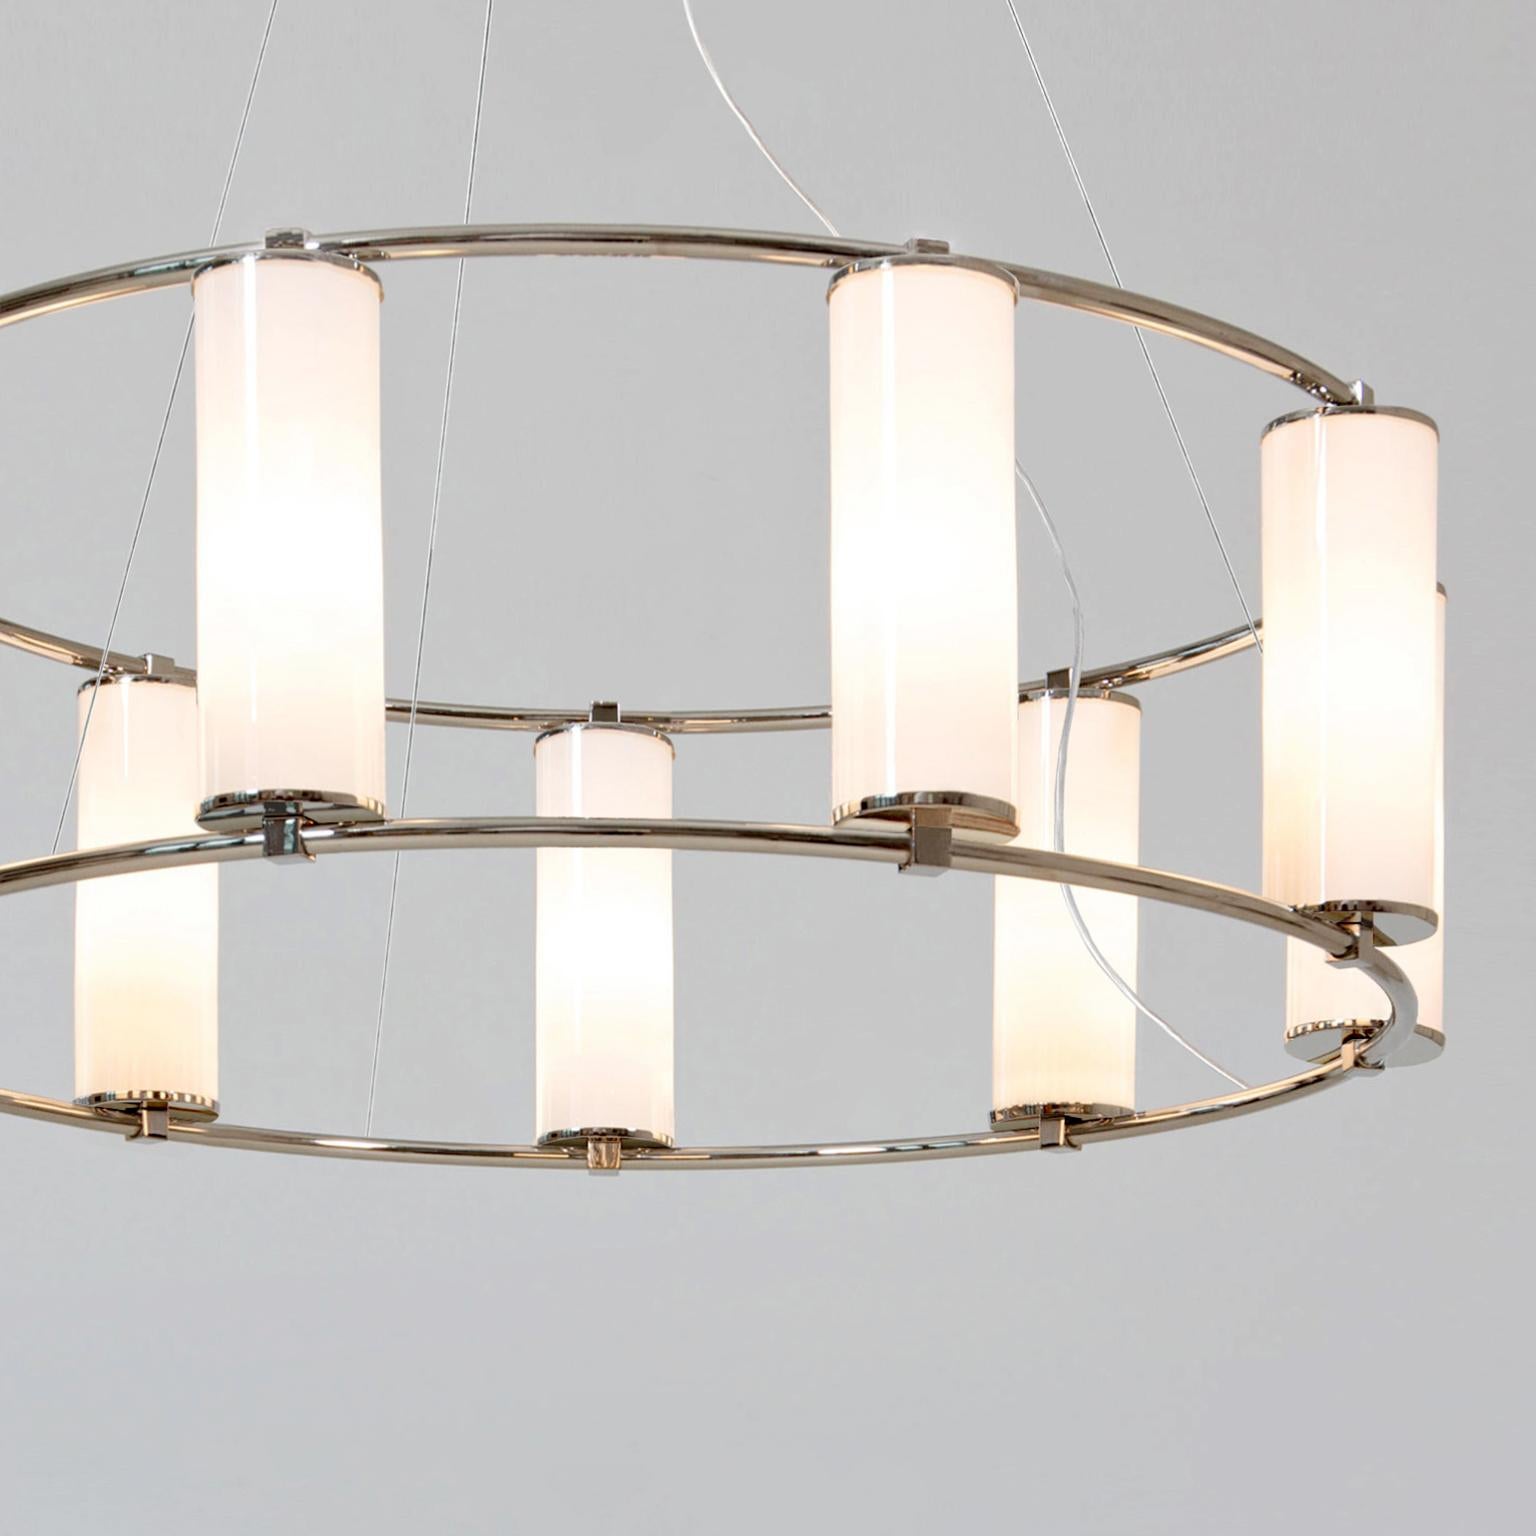 German Modernist Circular 9-Light Chandelier, Nickel-Plated Brass with Glass Cylinders For Sale